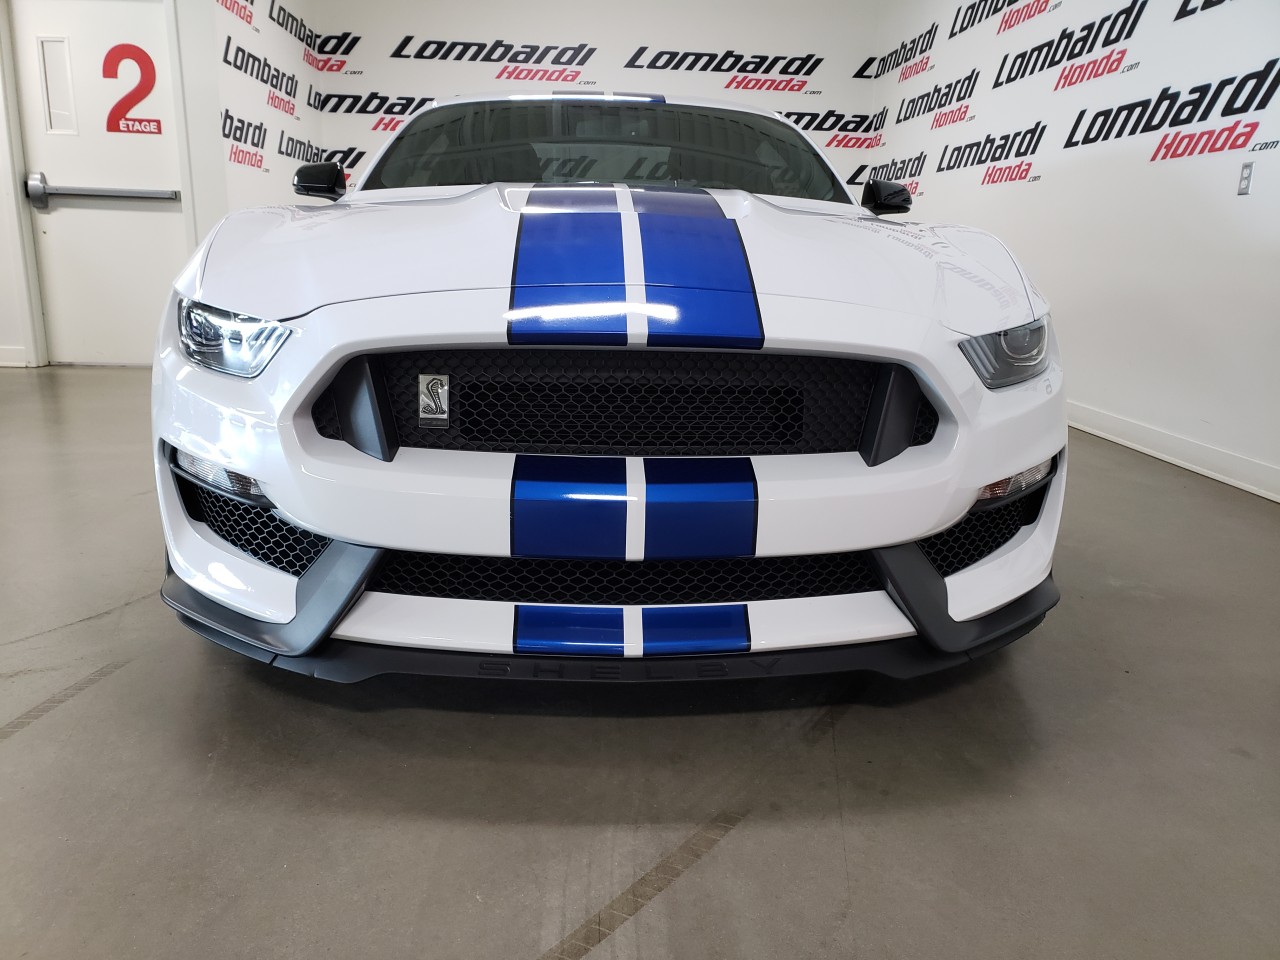 2017 Ford Mustang Shelby GT350 Main Image